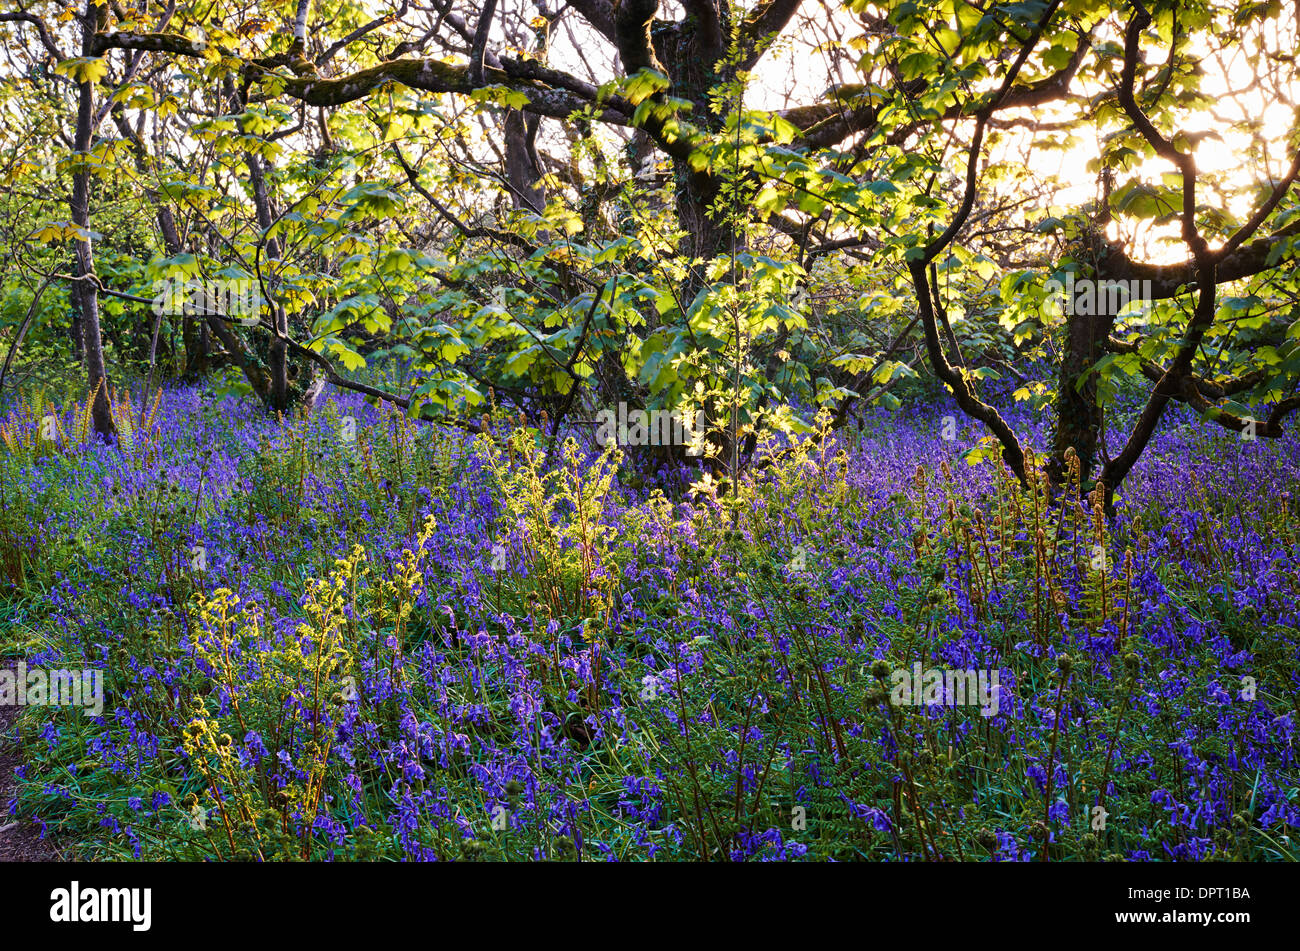 Dappled evening light shining through the trees highlighting the Bluebells and Ferns Stock Photo